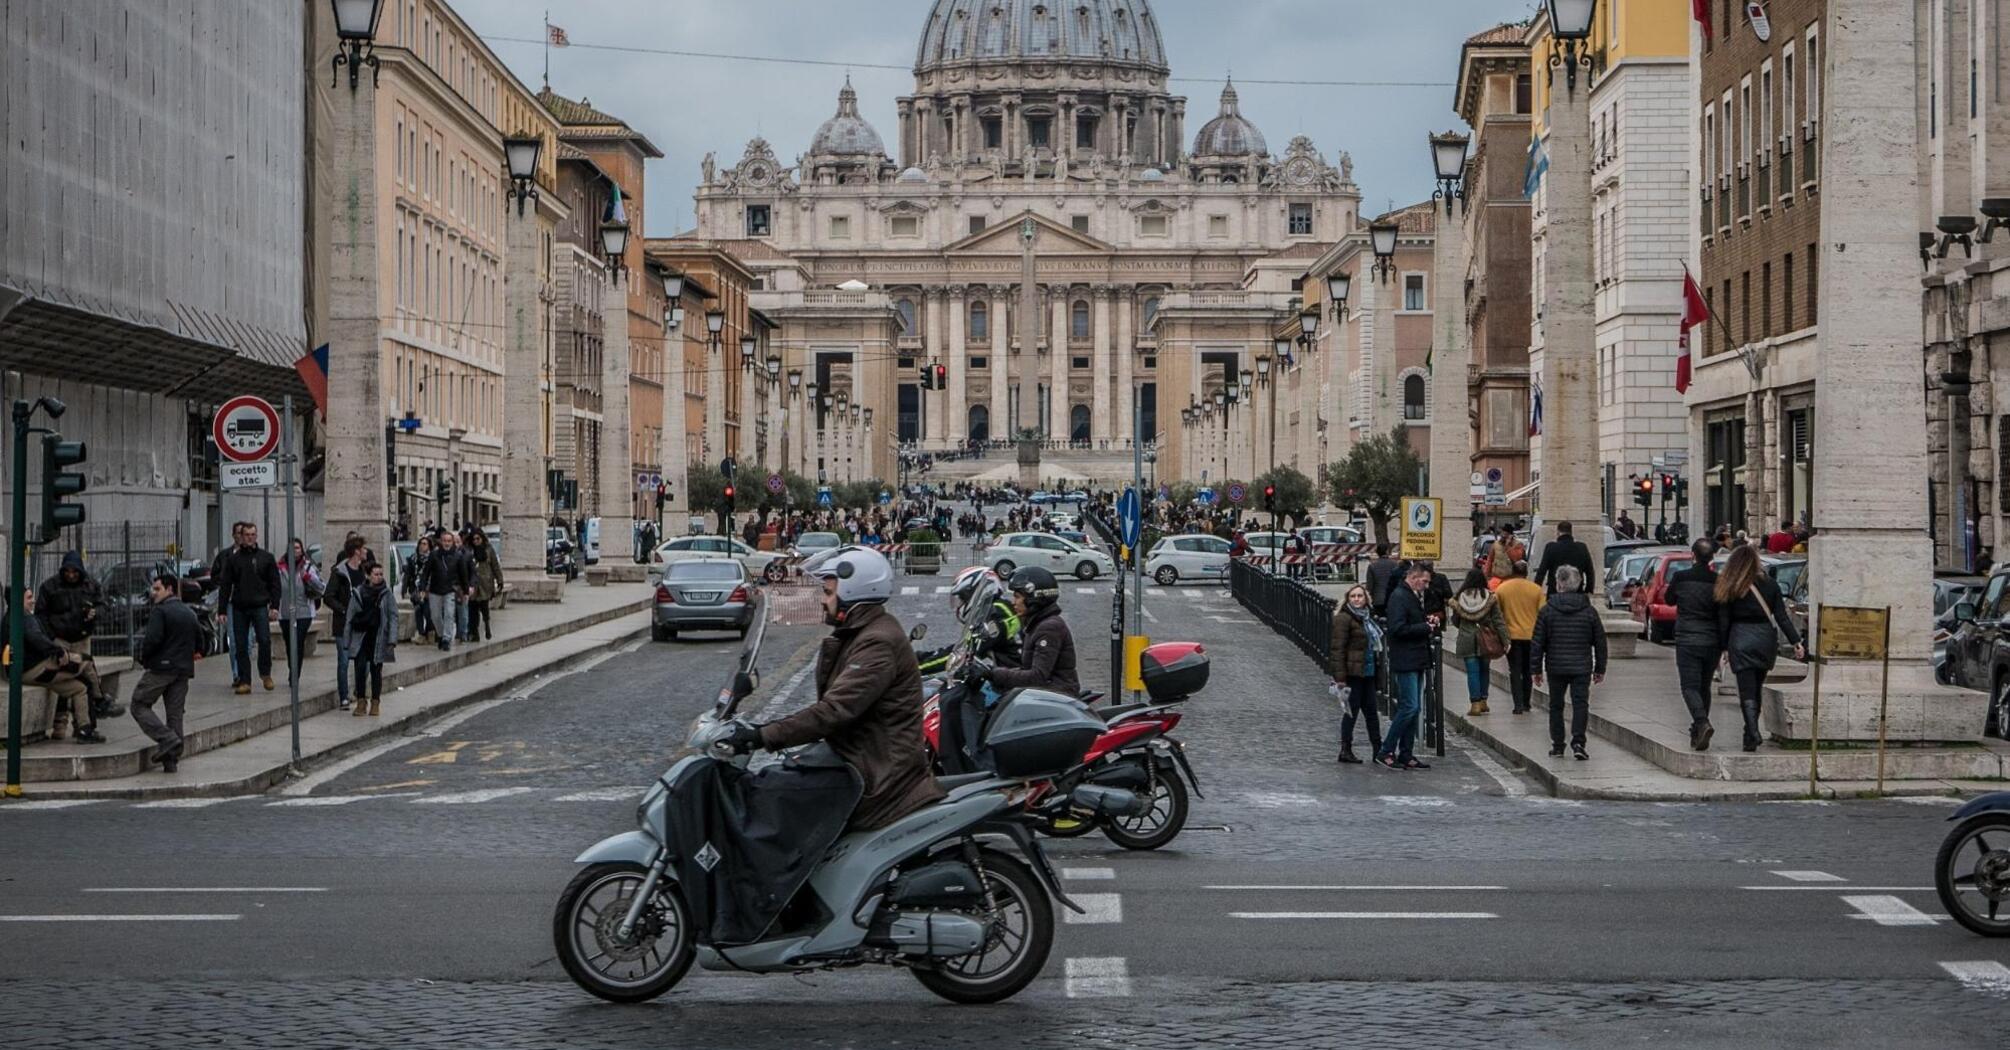 The road near St. Peter's Basilica